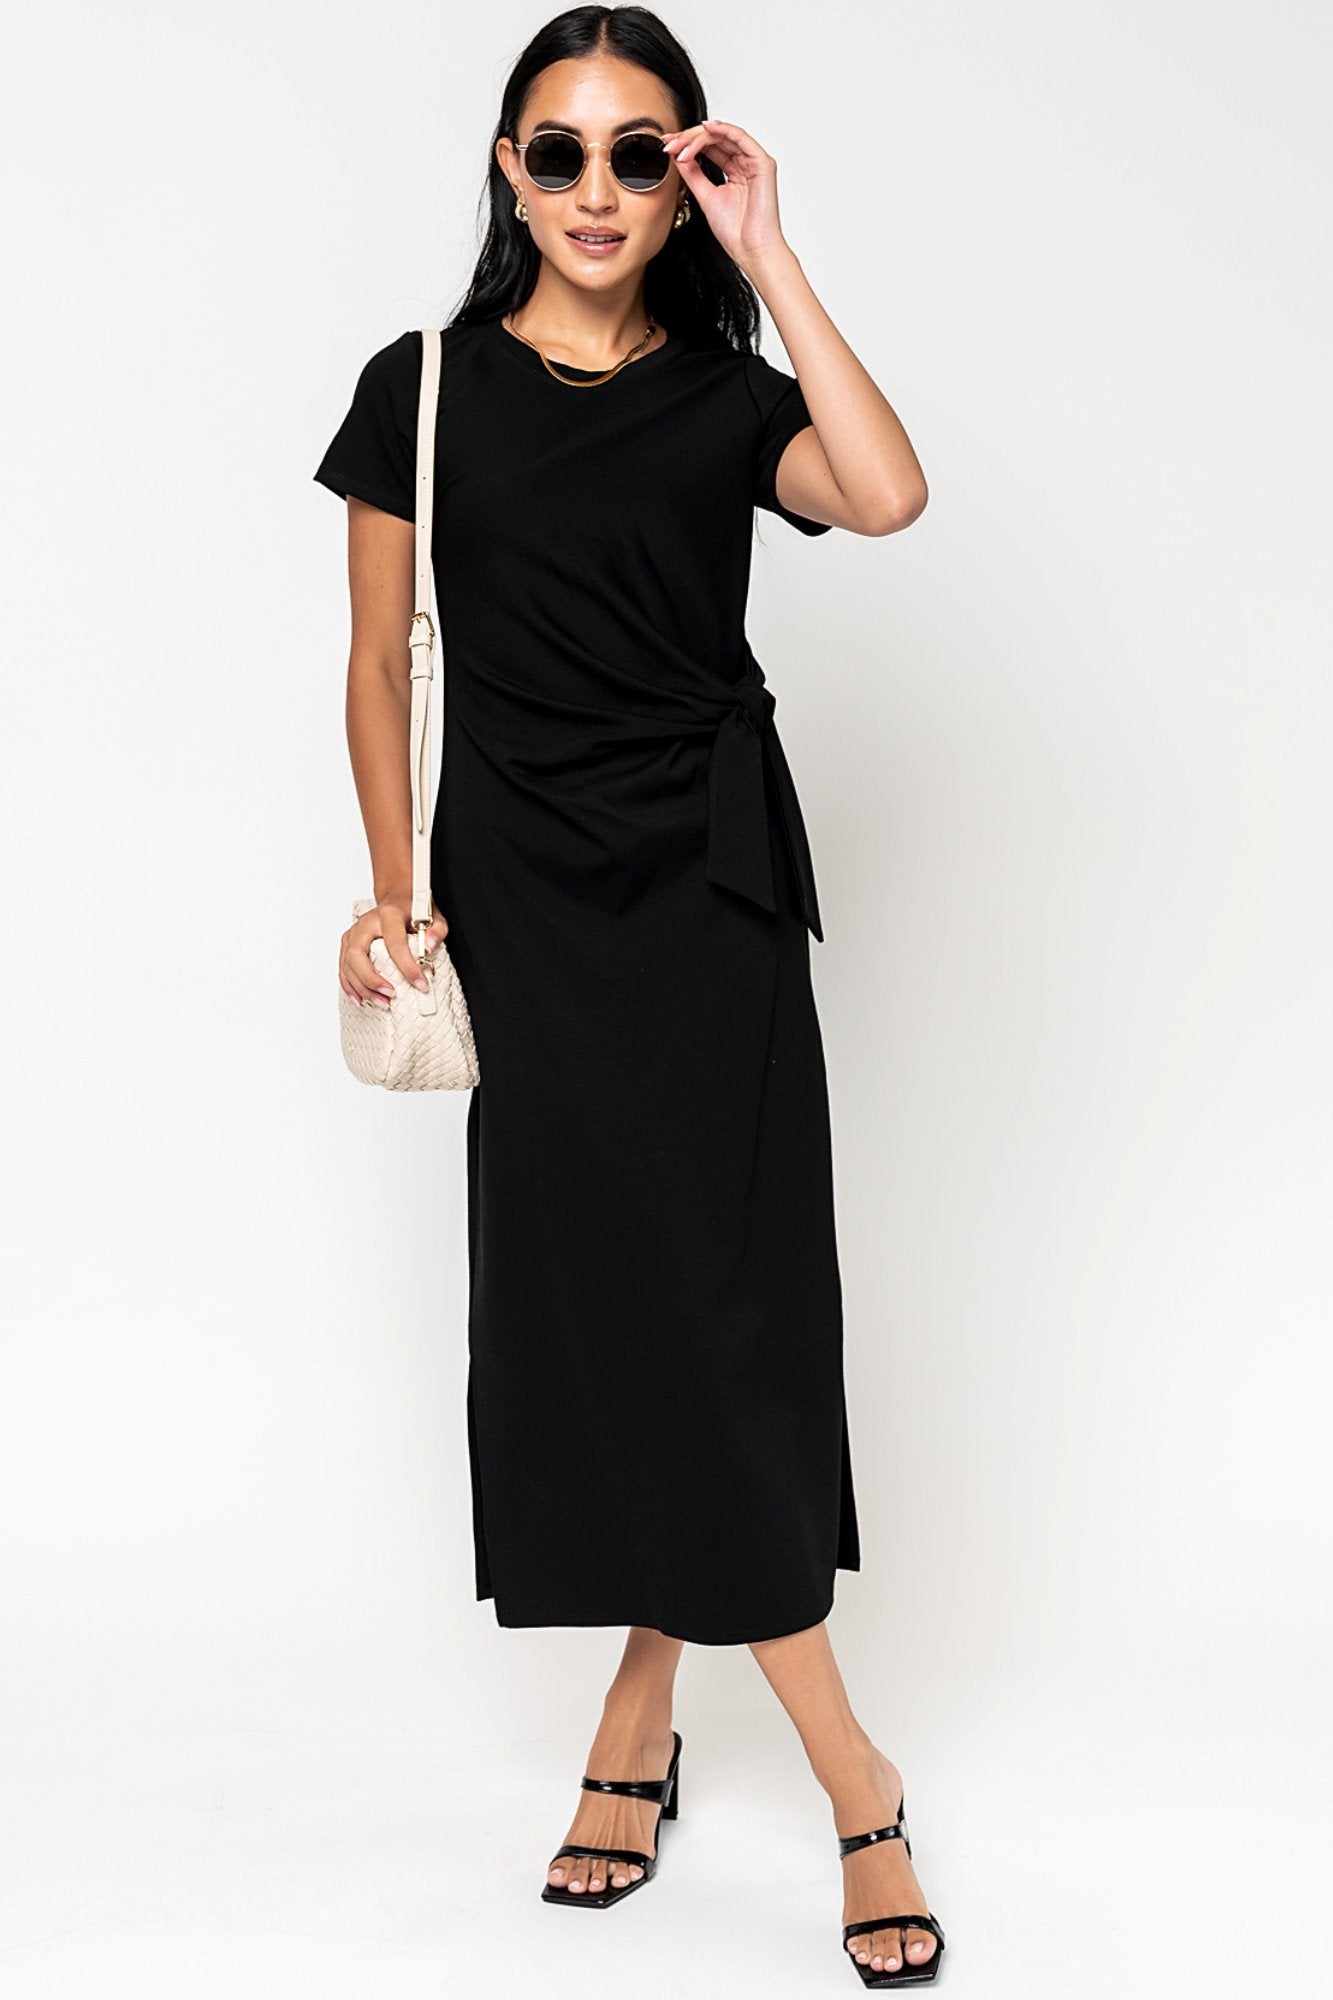 Starling Dress in Black (Small-XL) Holley Girl 